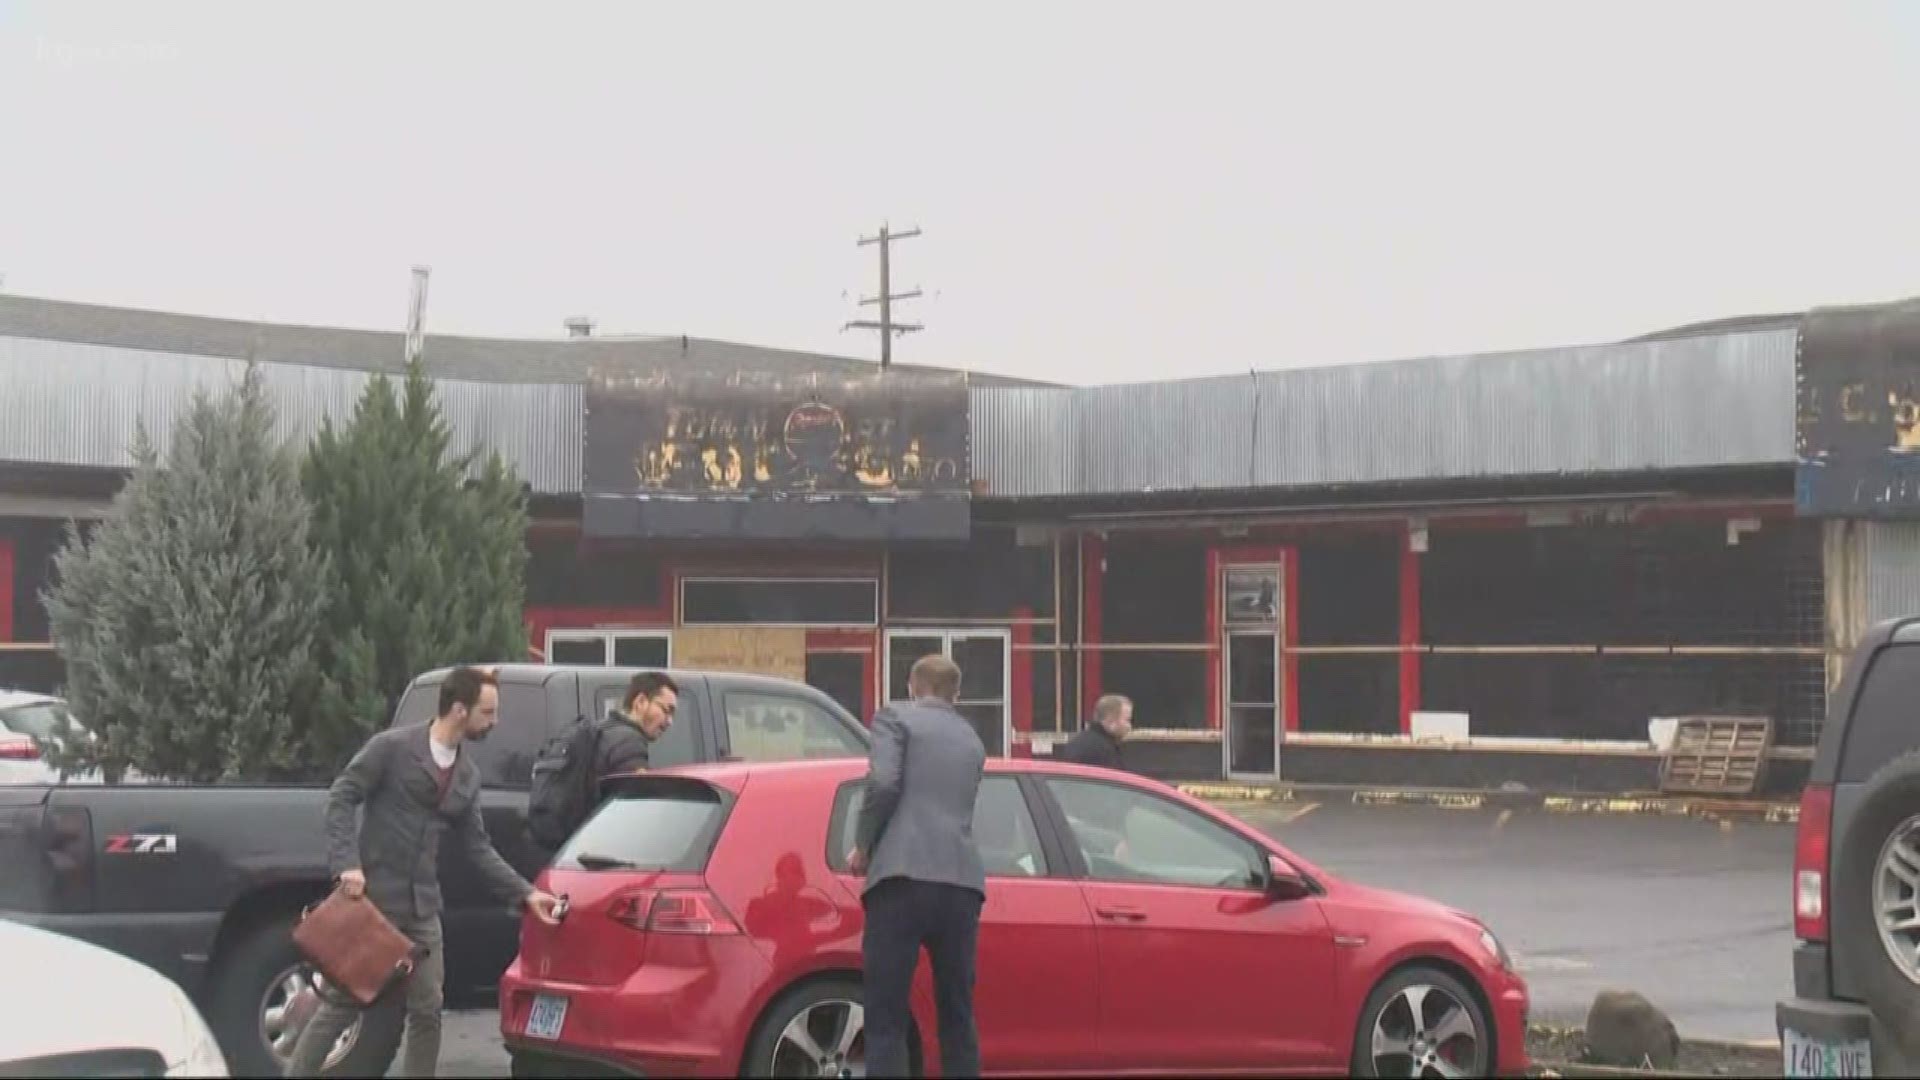 The demolition of eyesore abandoned Sugar Shack strip club in Portland's Cully neighborhood started Monday. It will be replaced with affordable housing.